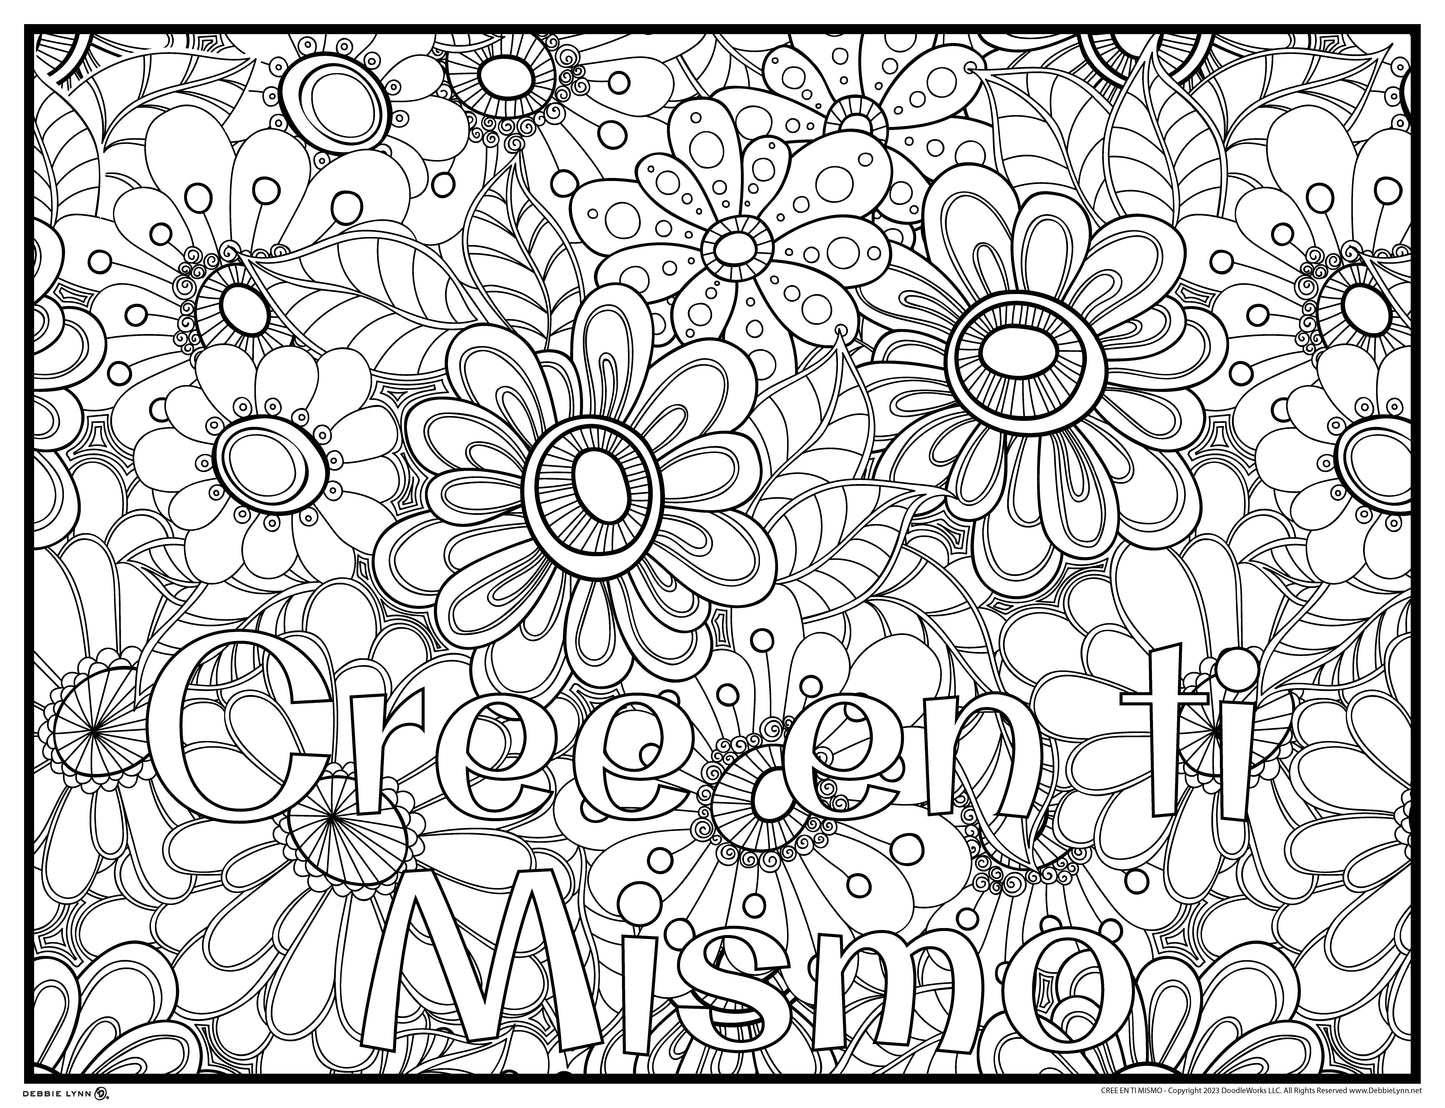 Cree en Ti  Mismo Personalized Giant Coloring Poster 48x63"